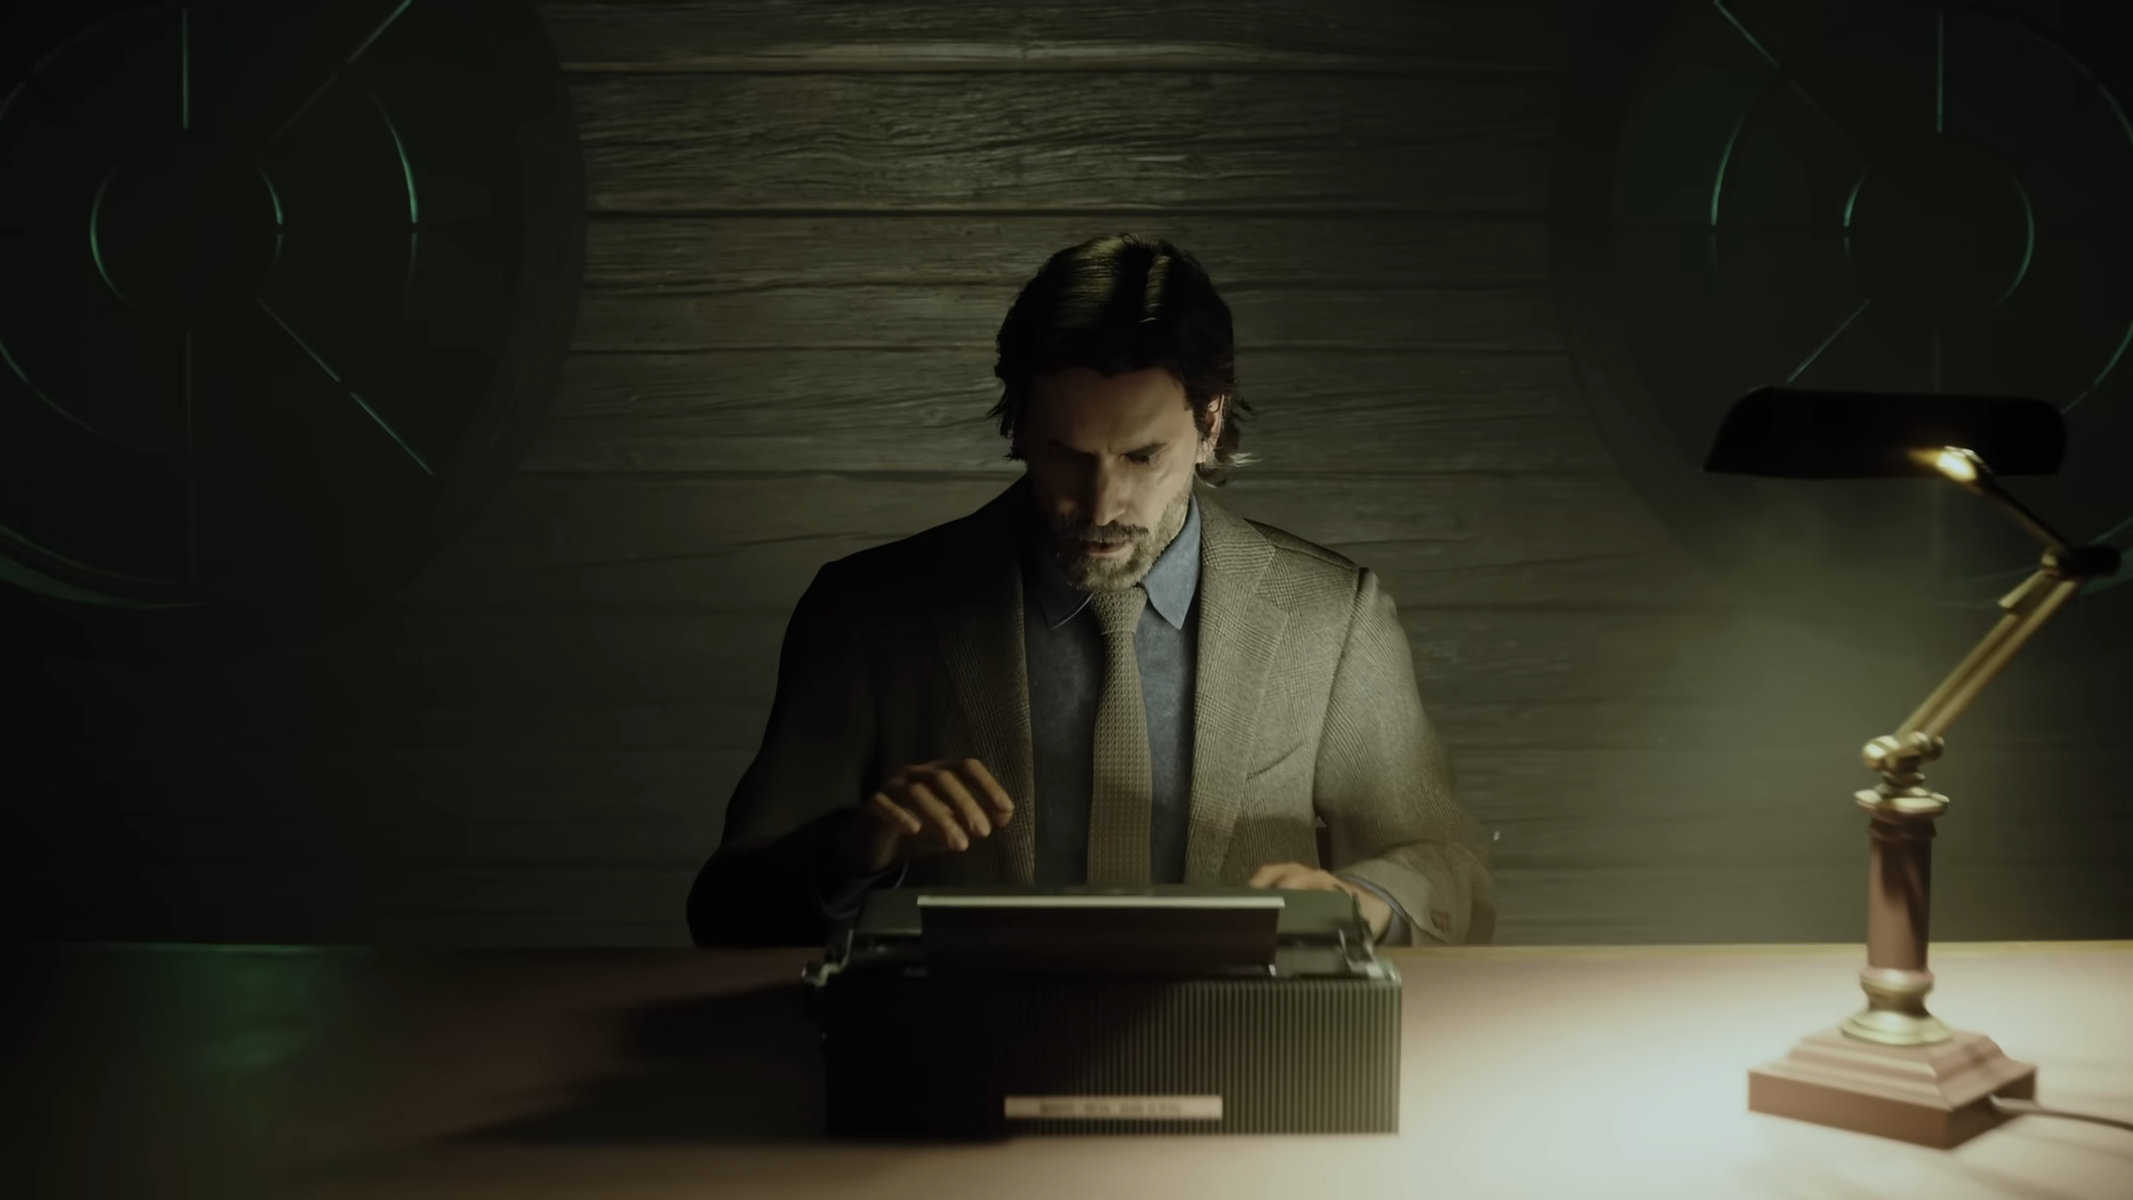 Alan Wake 2 Preloading Begins Soon: What You Need to Know